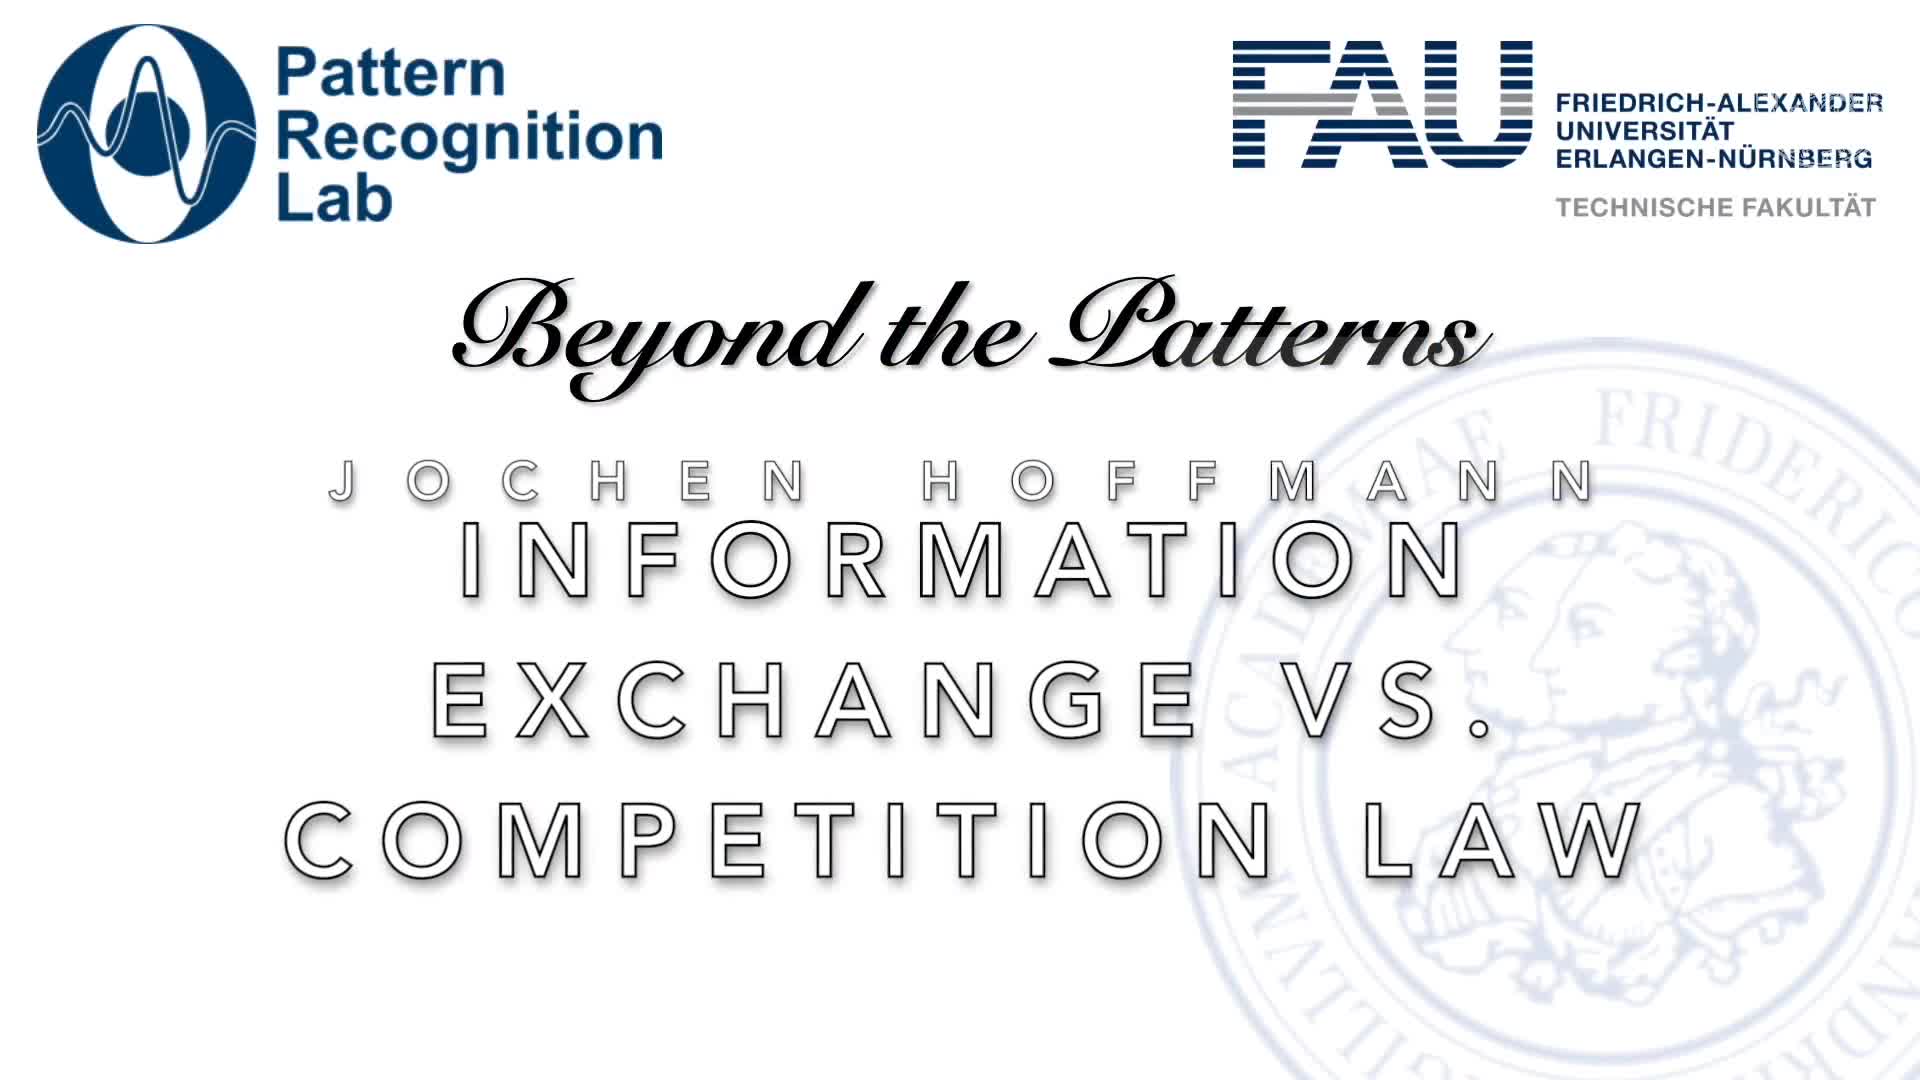 Beyond the Patterns - Jochen Hoffmann - Information exchange as an infringement of competition law preview image